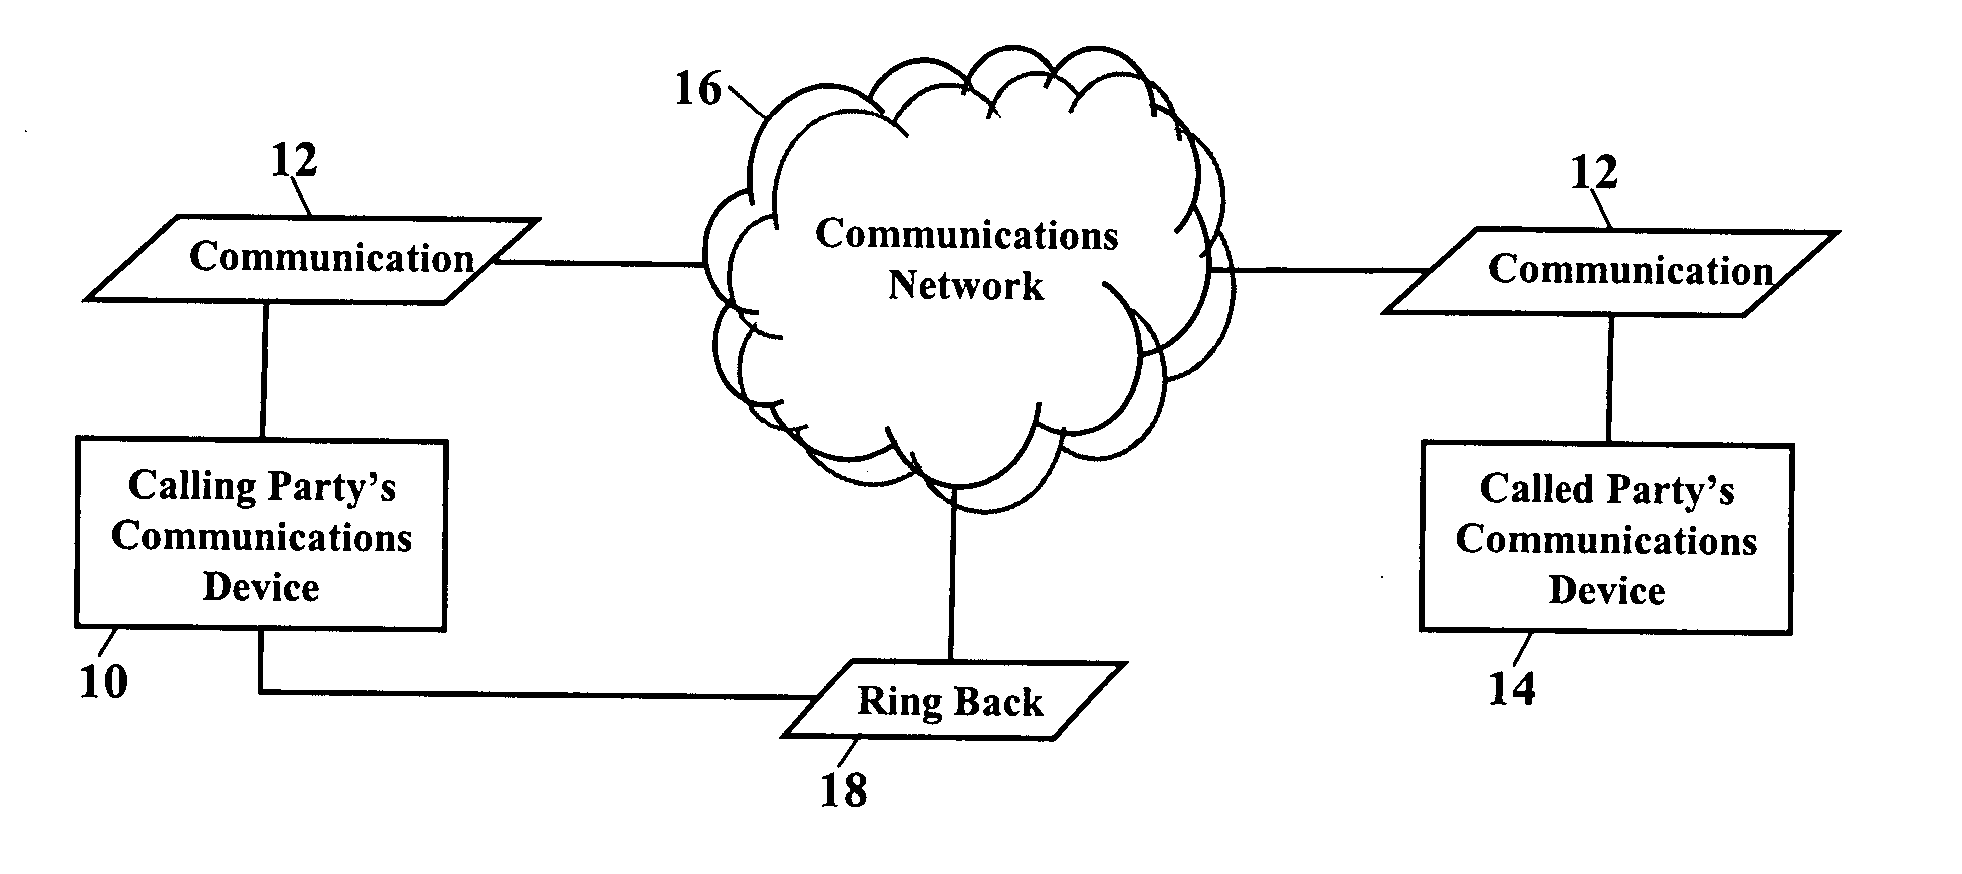 Methods, systems, devices, and products for providing ring backs